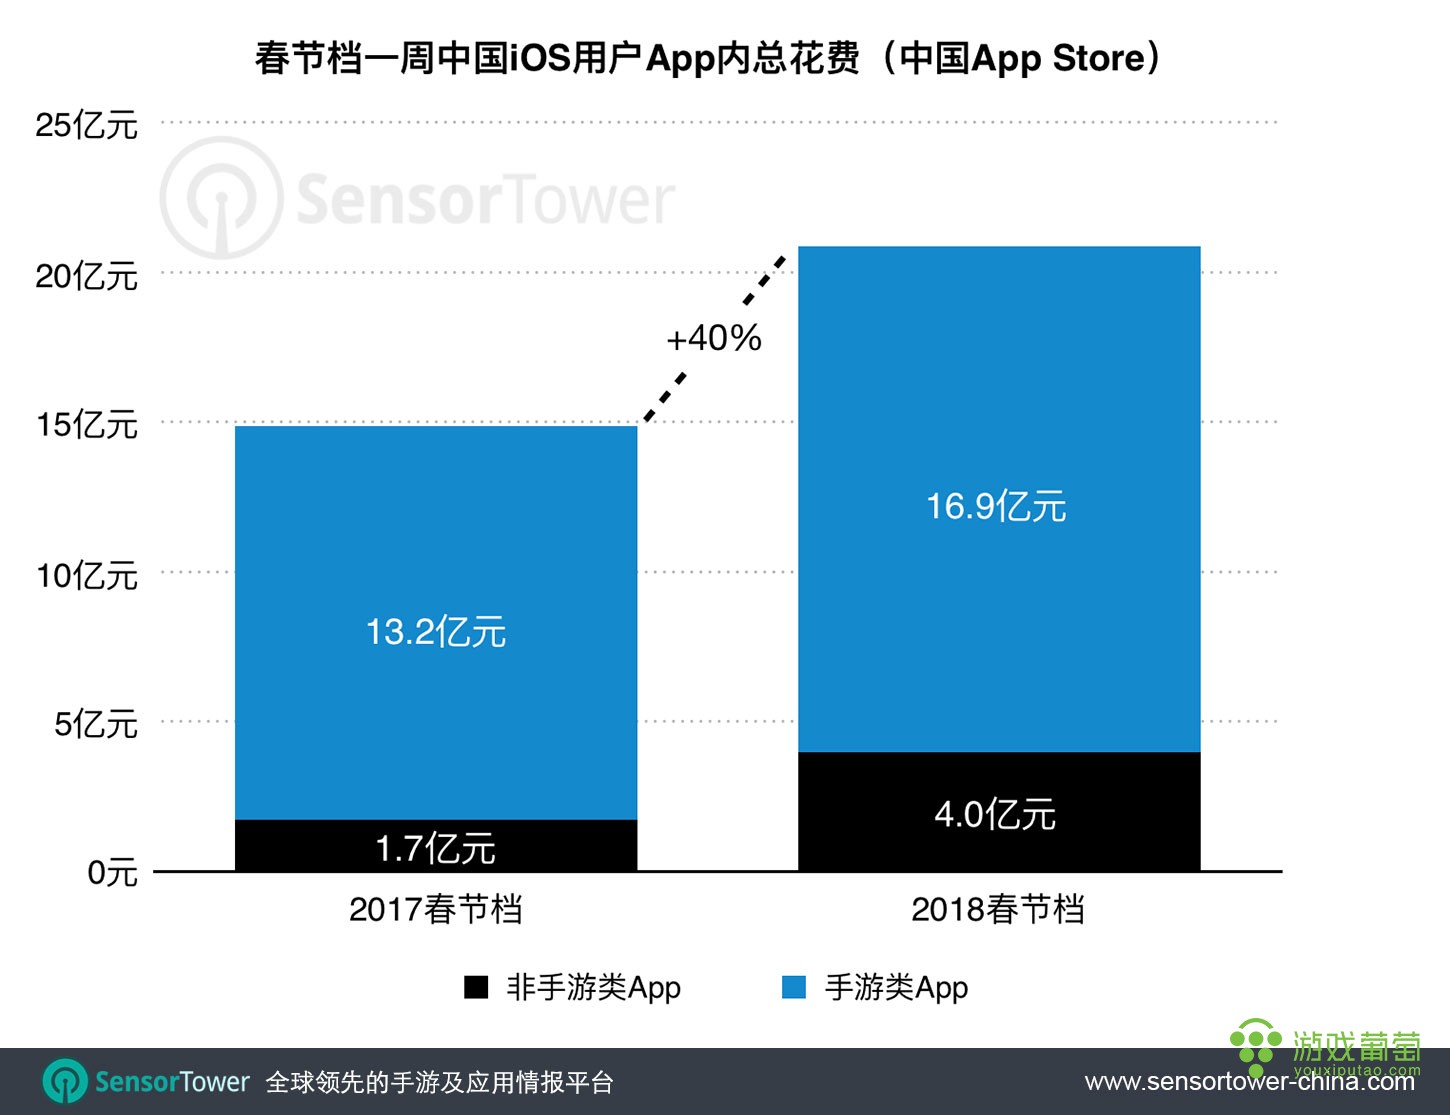 2018-chinese-new-year-app-store-revenue.png.jpeg